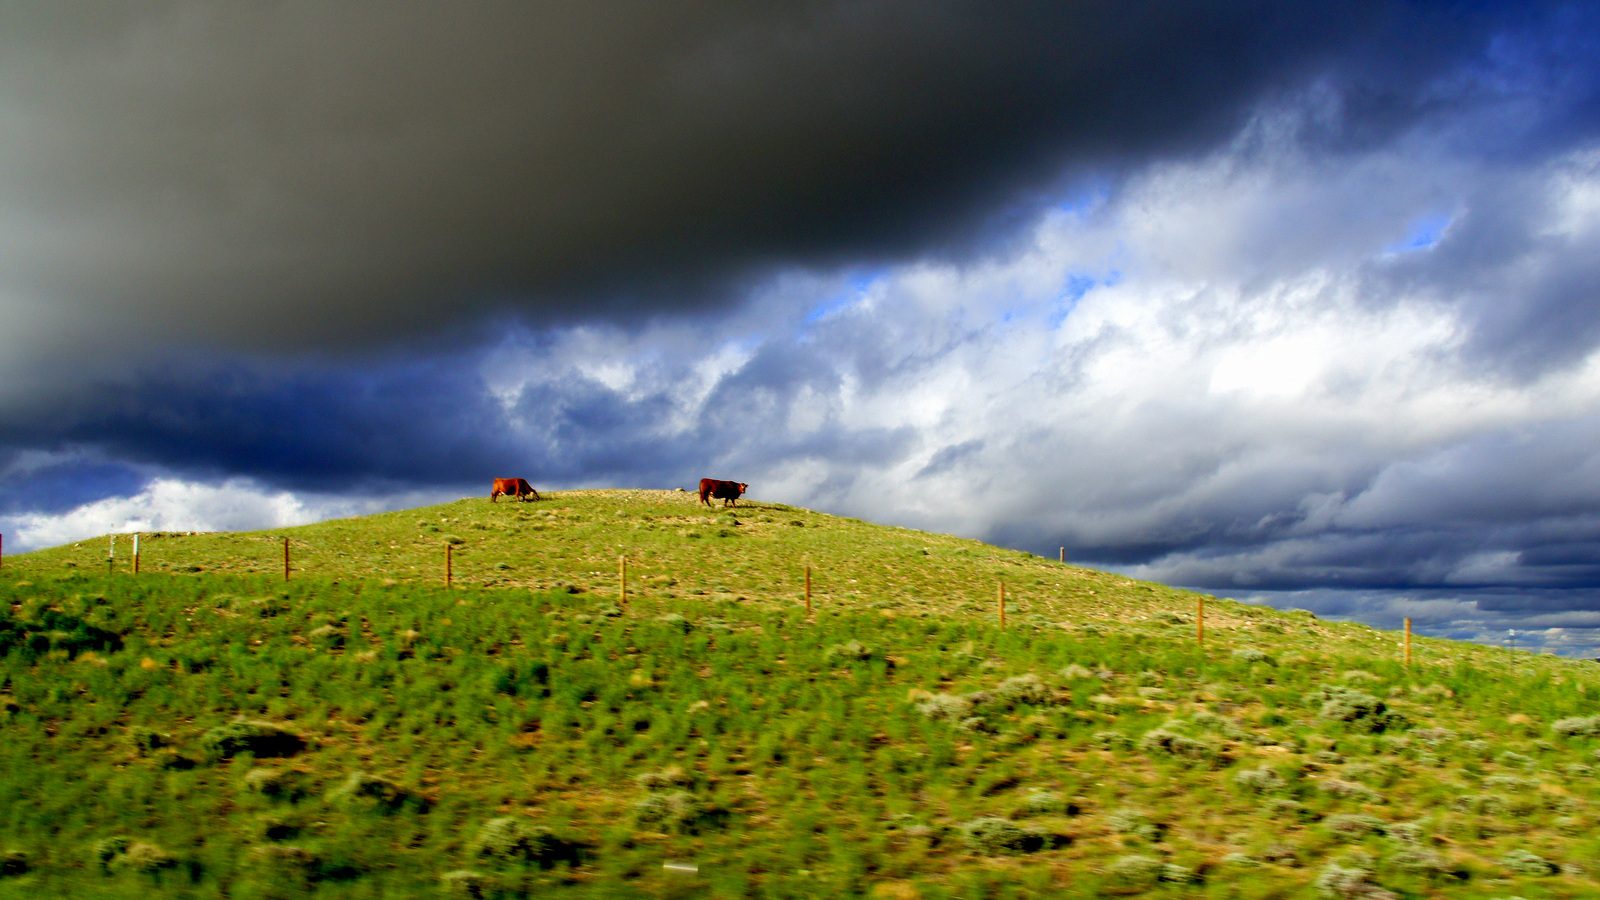 Cows under an incoming storm in the middle of nowhere Wyoming.